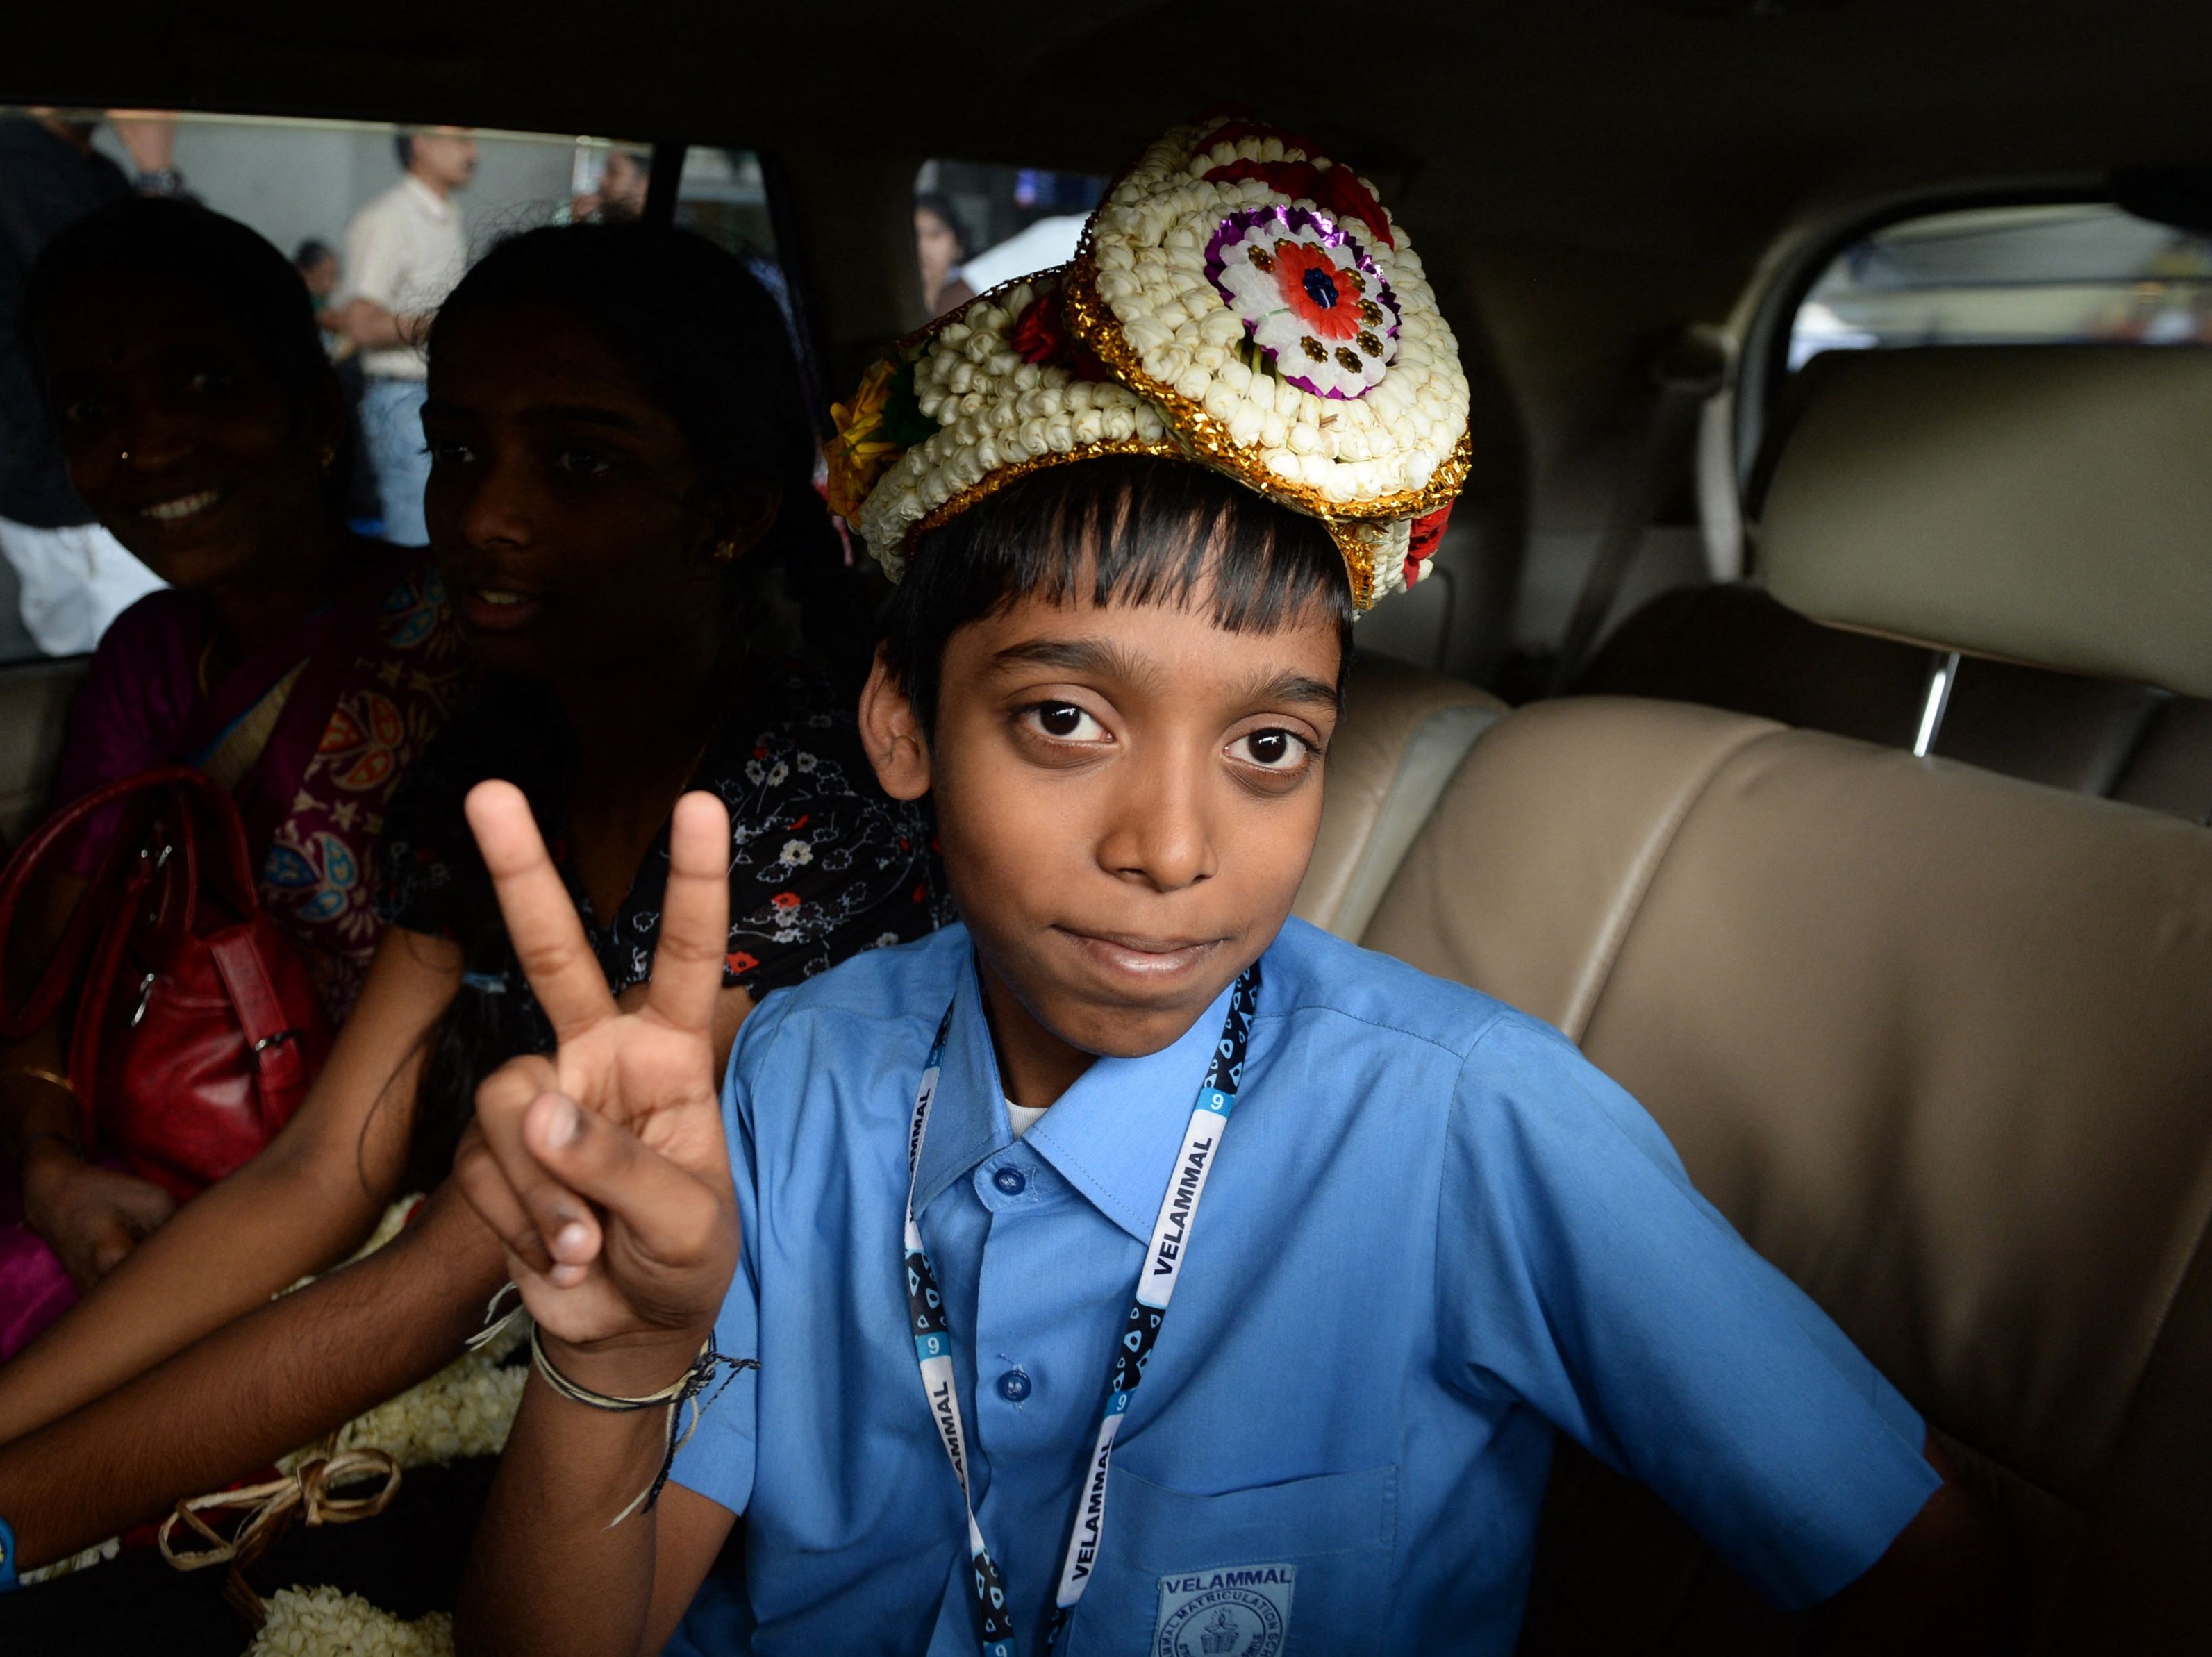 Indian chess prodigy Rameshbabu Praggnanandhaa, poses for a photograph on his arrival at an airport in Chennai